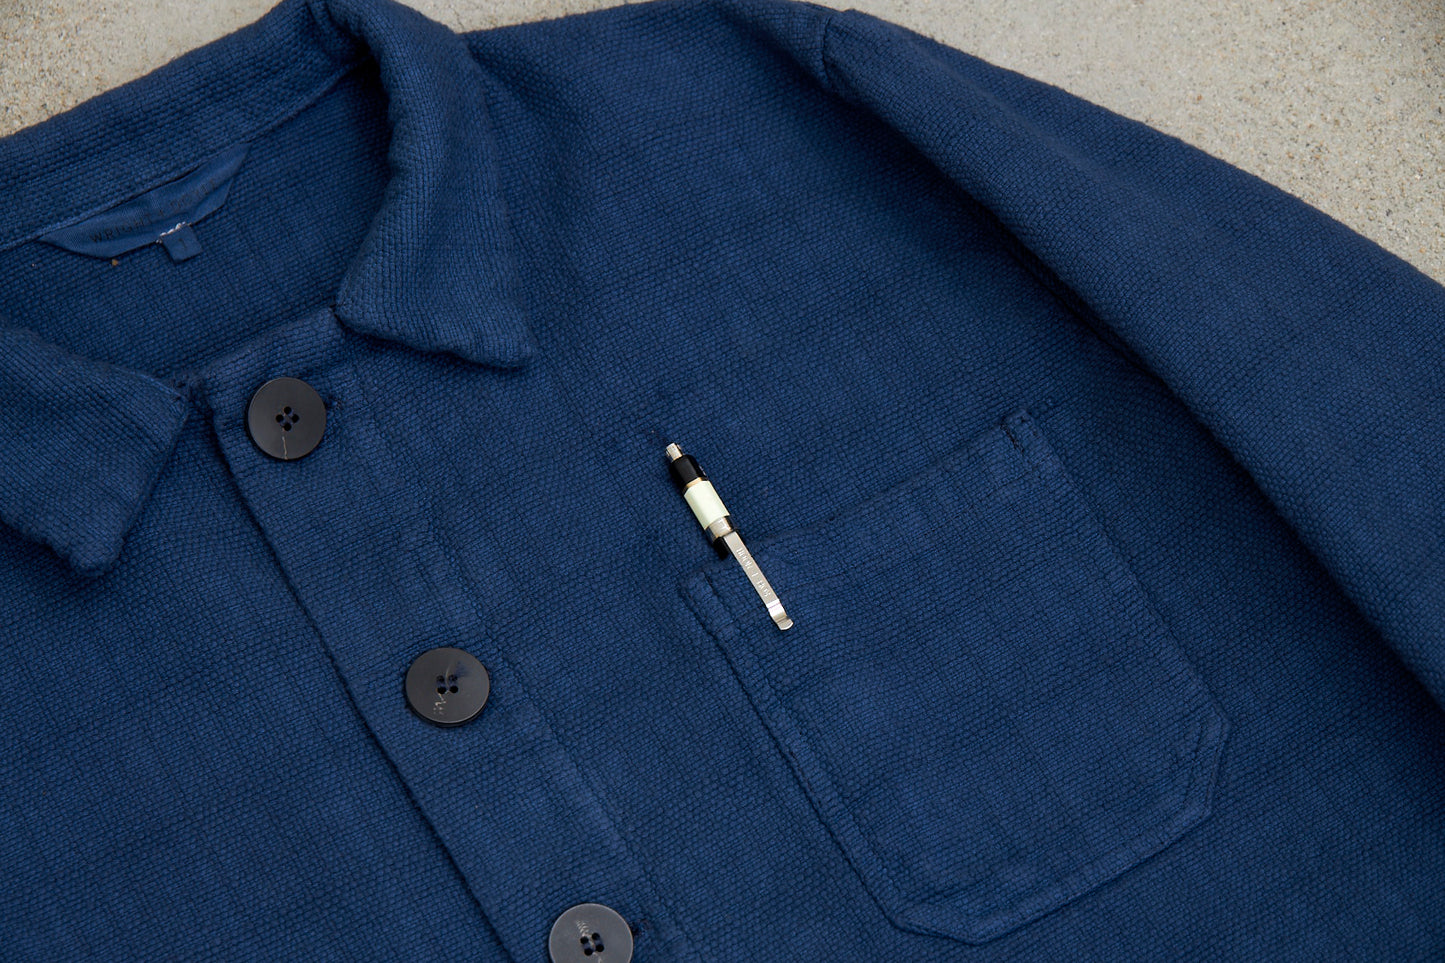 Propegator's Jacket without Liner - Handwoven Indigo Canvas